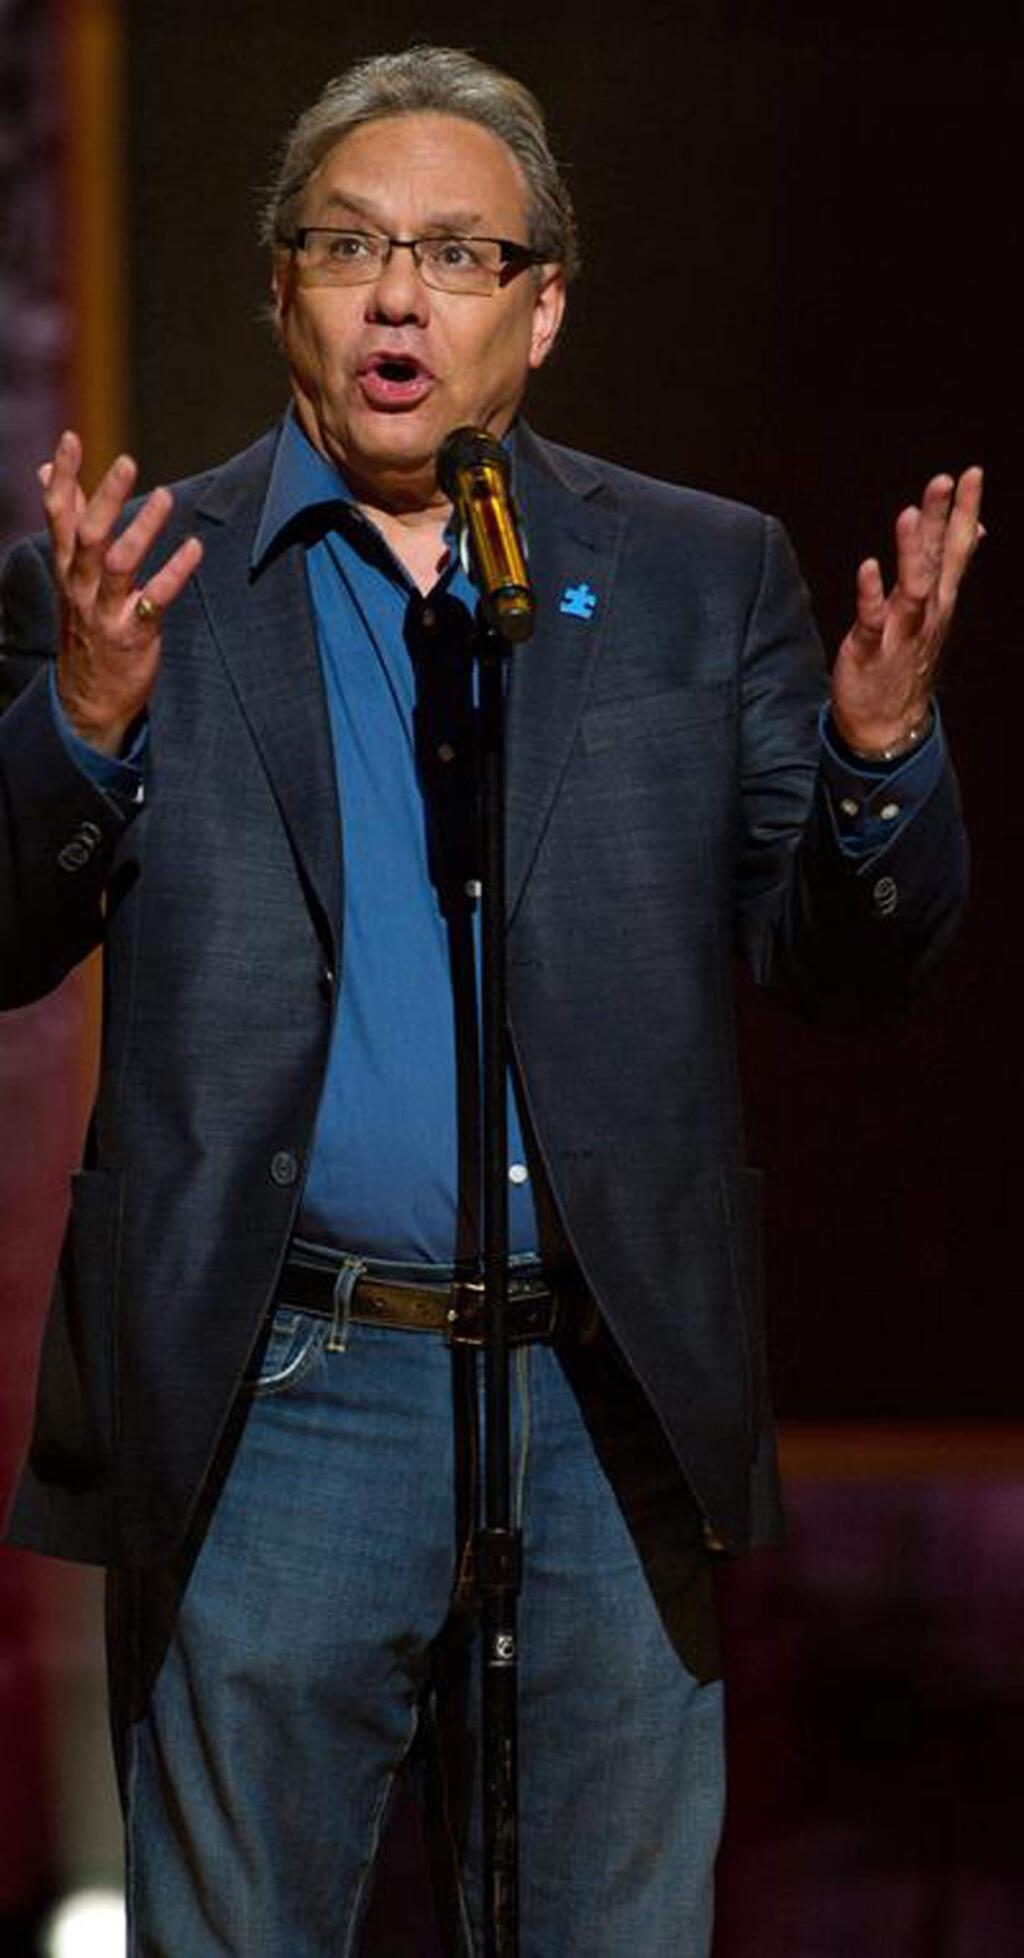 Comedian and actor Lewis Black brings his 'The Joke's On US' tour to the Luther Burbank Center in Santa Rosa on Sunday, Jan. 20, 2019. (LEWISBLACK.COM)